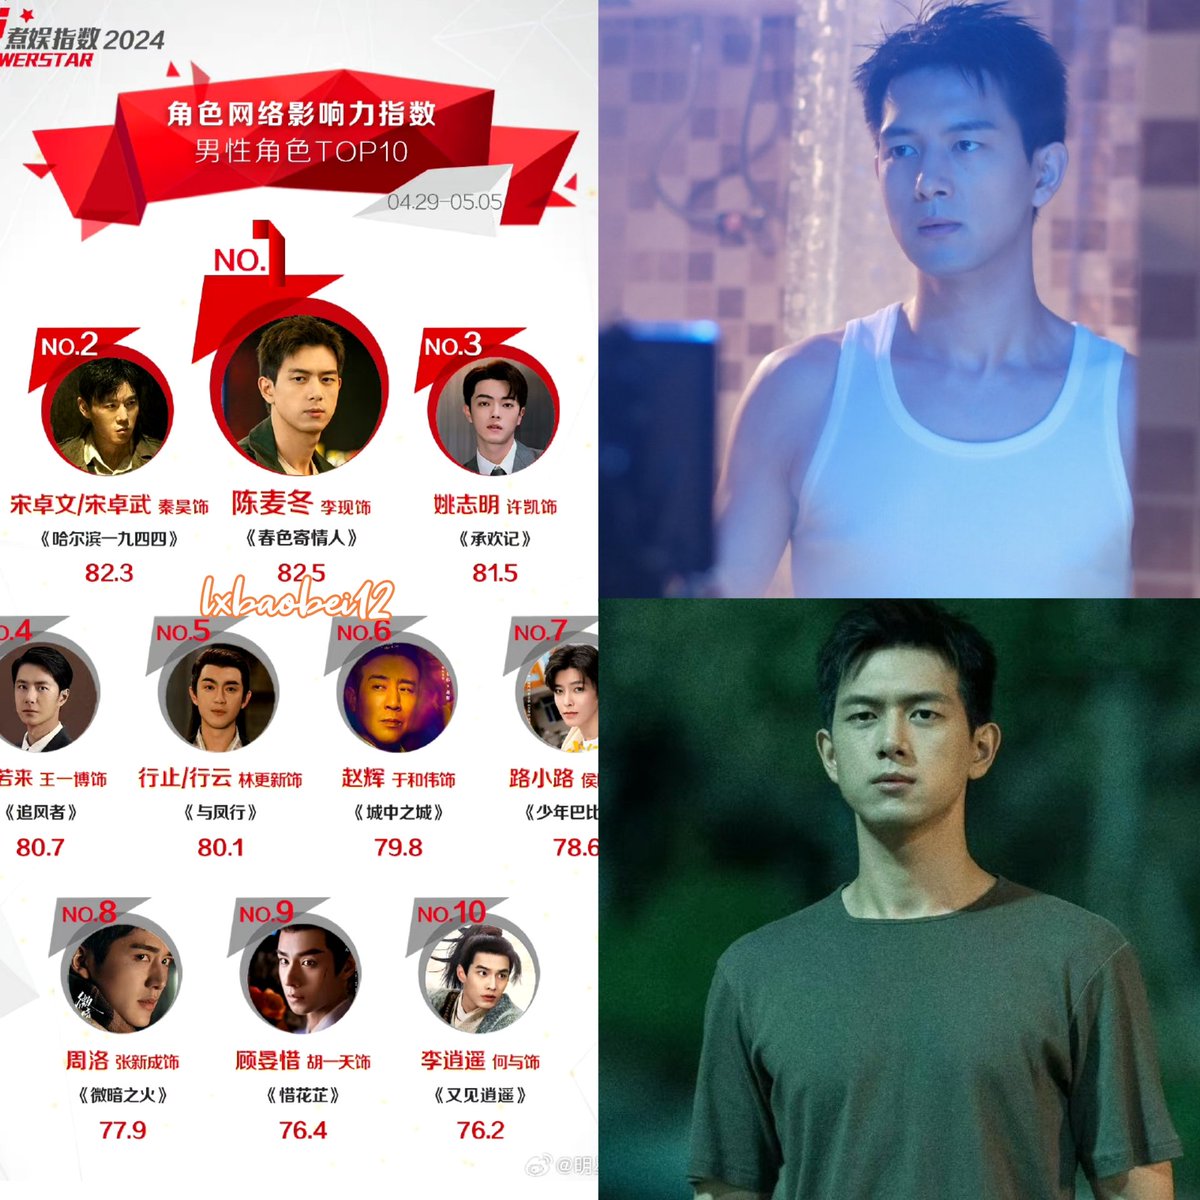 Yay! Congrats to our Baobei #LiXian as his character 'Chen Maidong' in Tencent's urban drama #WillLoveInSpring is on Top 1️⃣ in Powerstar Top 10 Male Character Network Influence Index as of 4-29 to 5-5, 2024! 🎉😍🧡